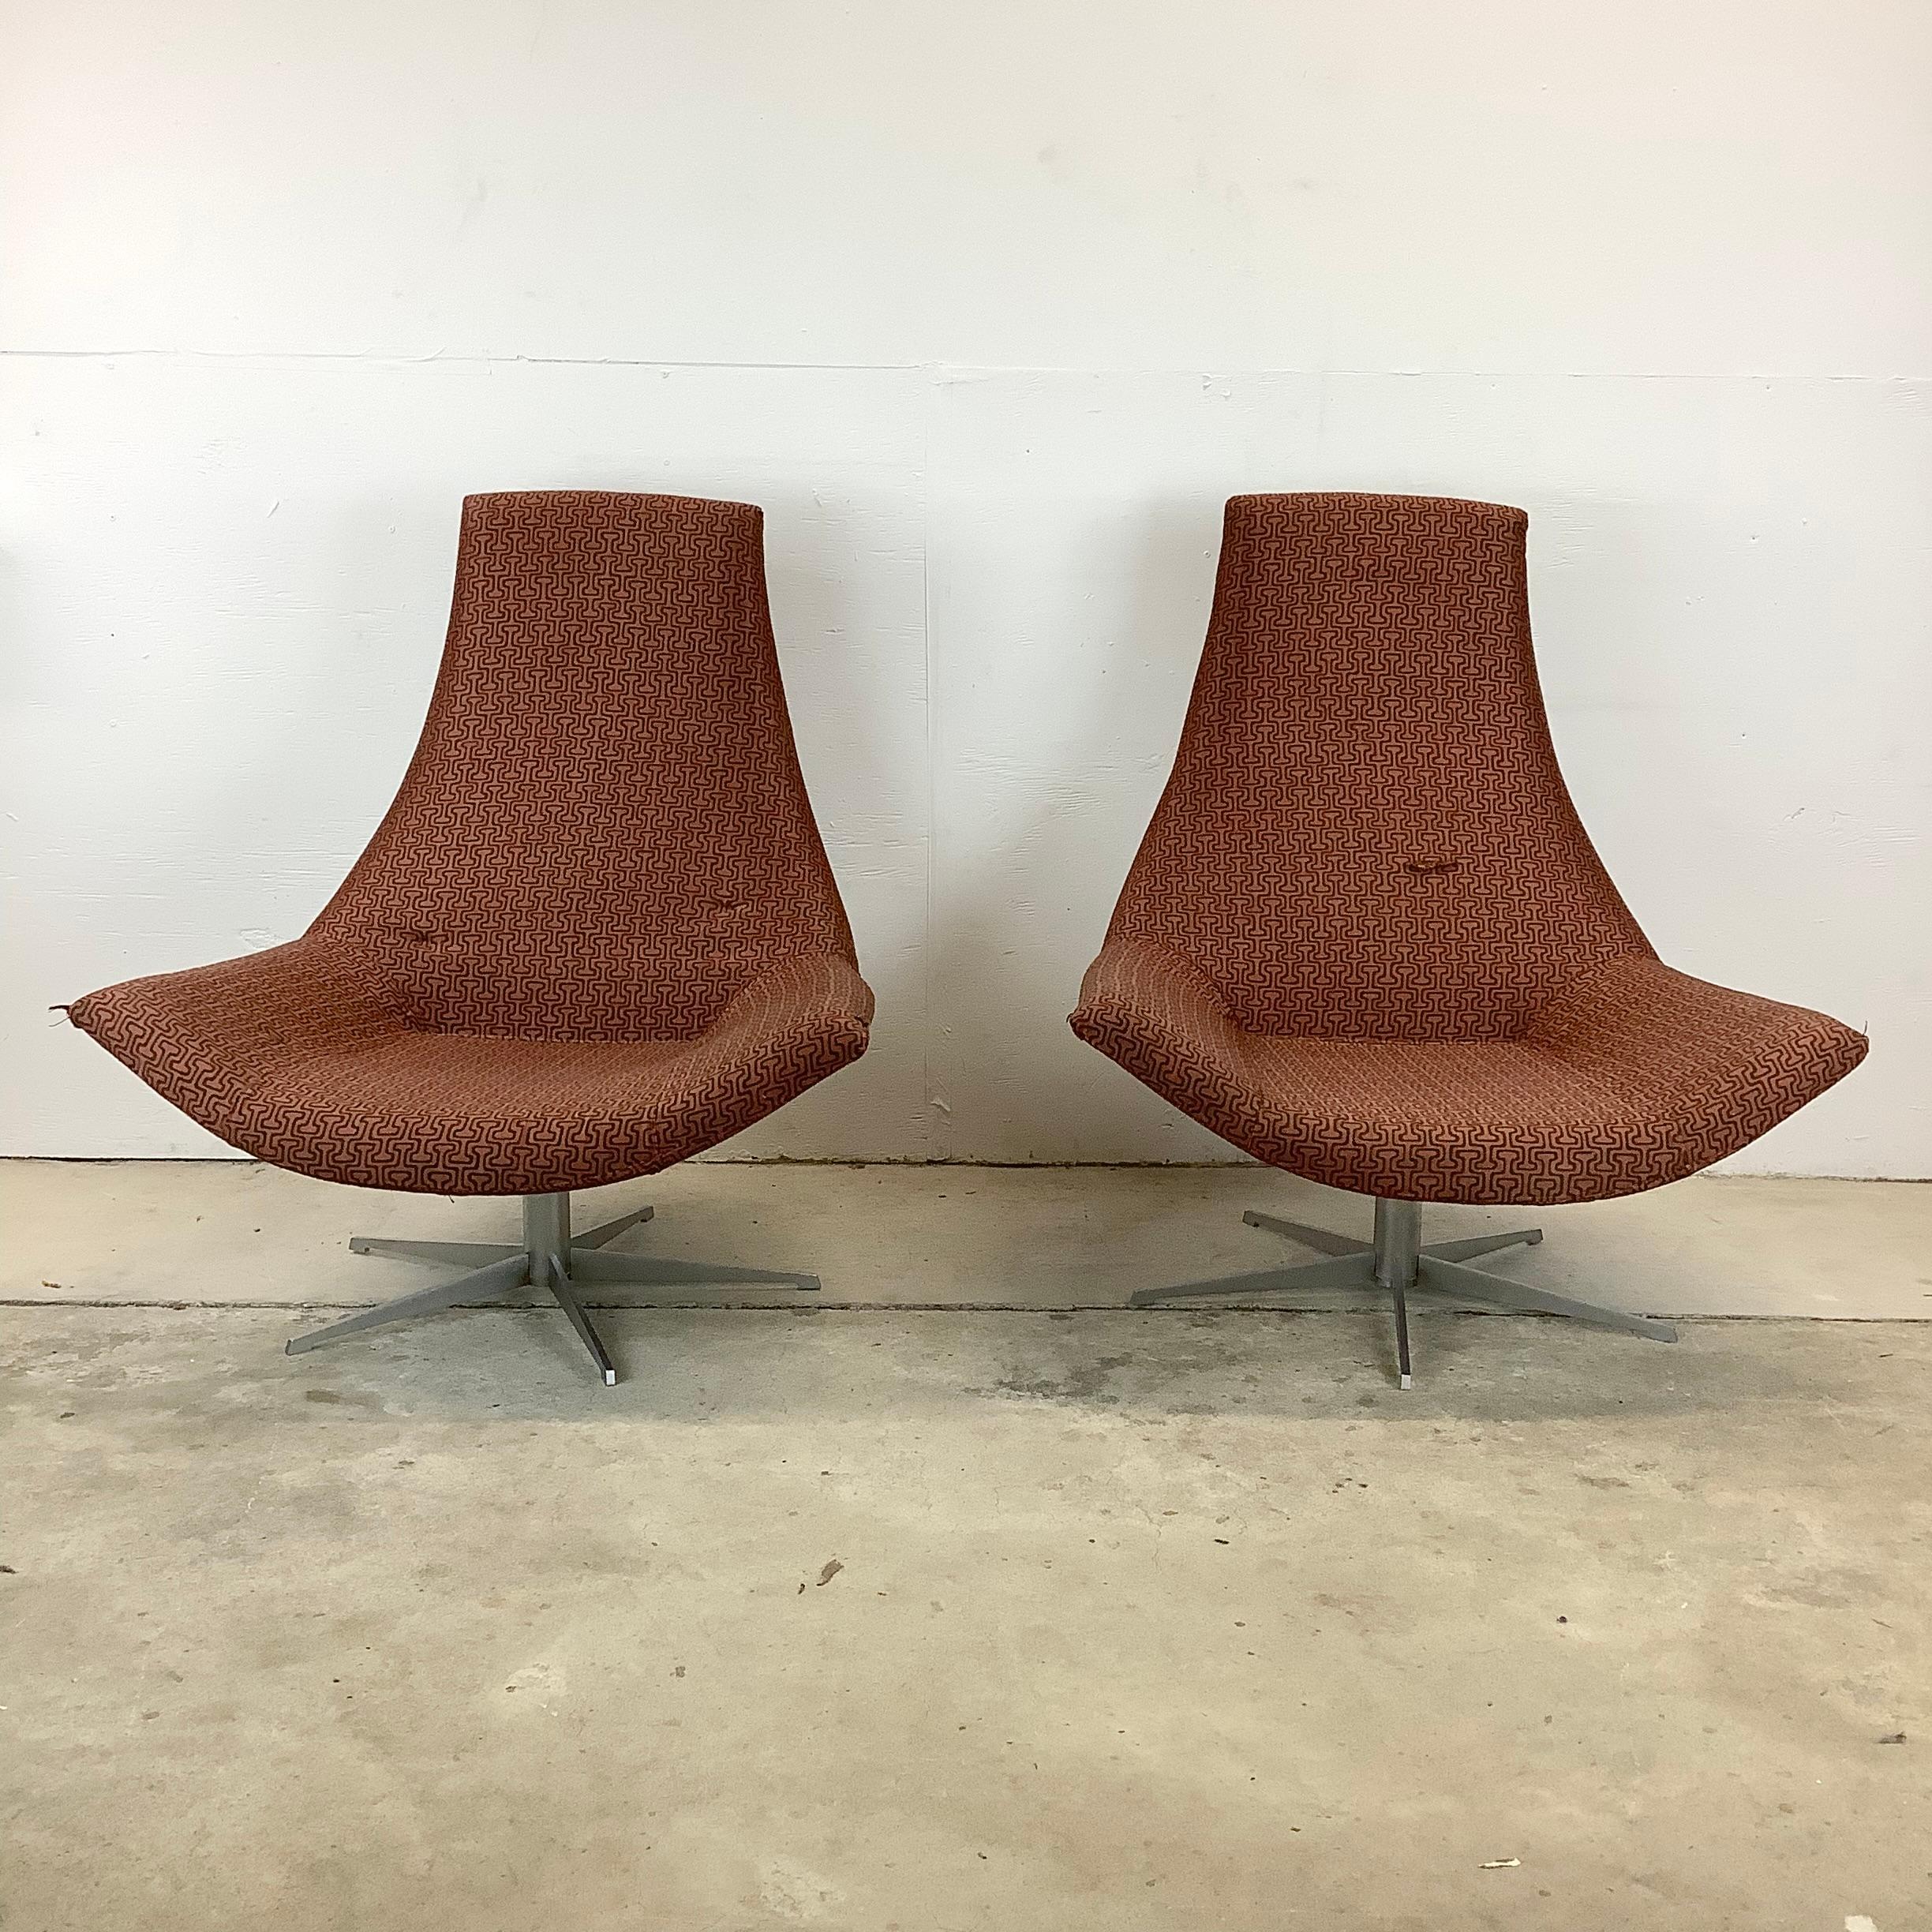 Step into the world of Italian modern design with this captivating pair of Modern Swivel Lounge Chairs. These chairs are an invitation to indulge in the sophistication and comfort that Italian design is renowned for, while the shapely and